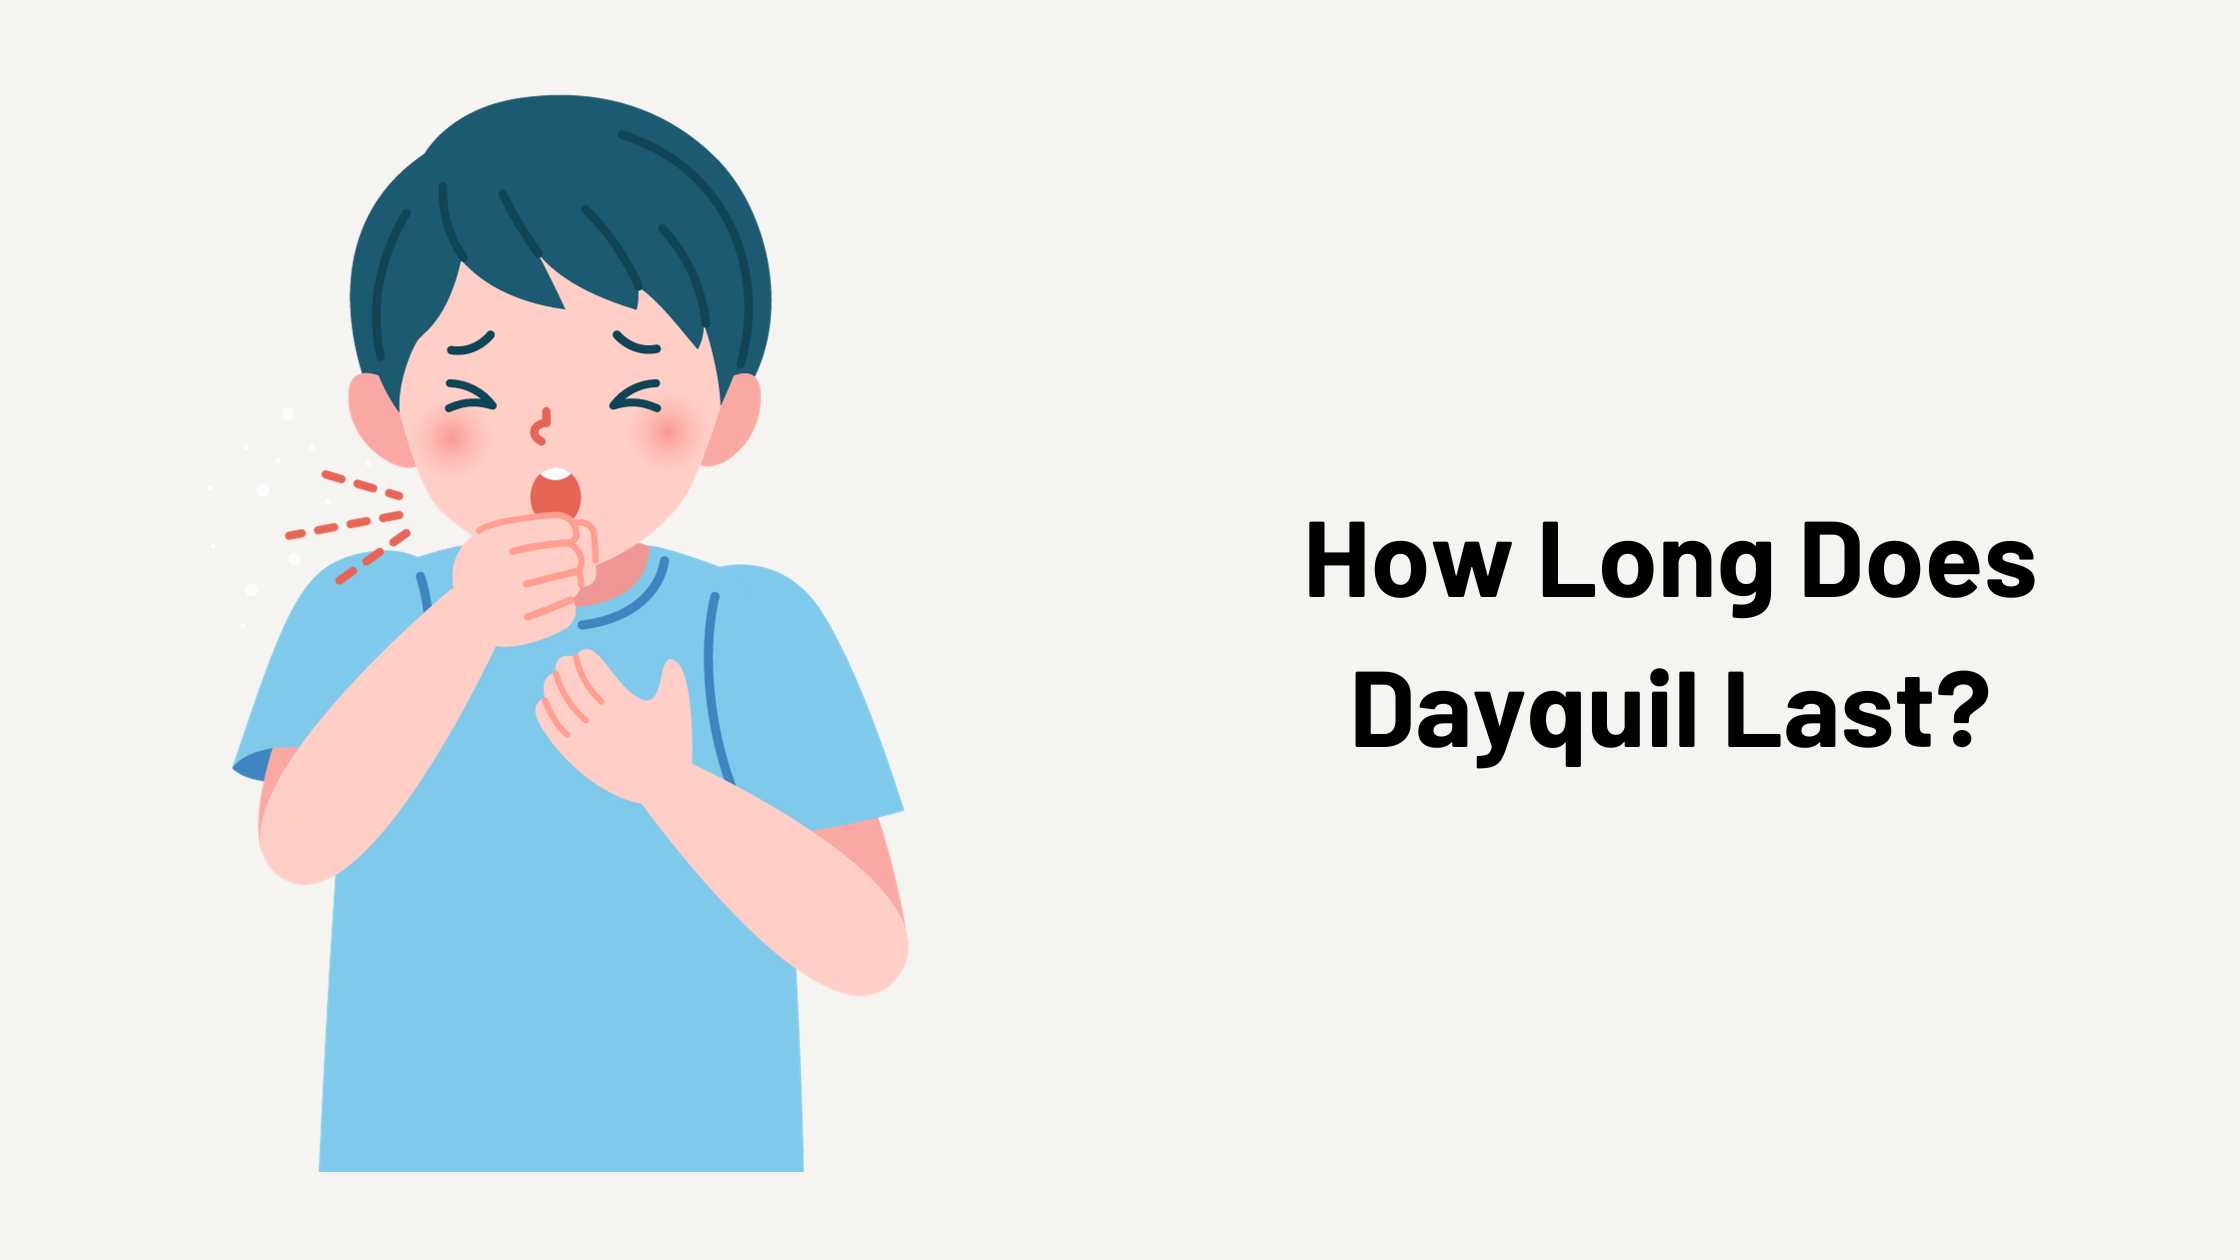 How Long Does Dayquil Last?